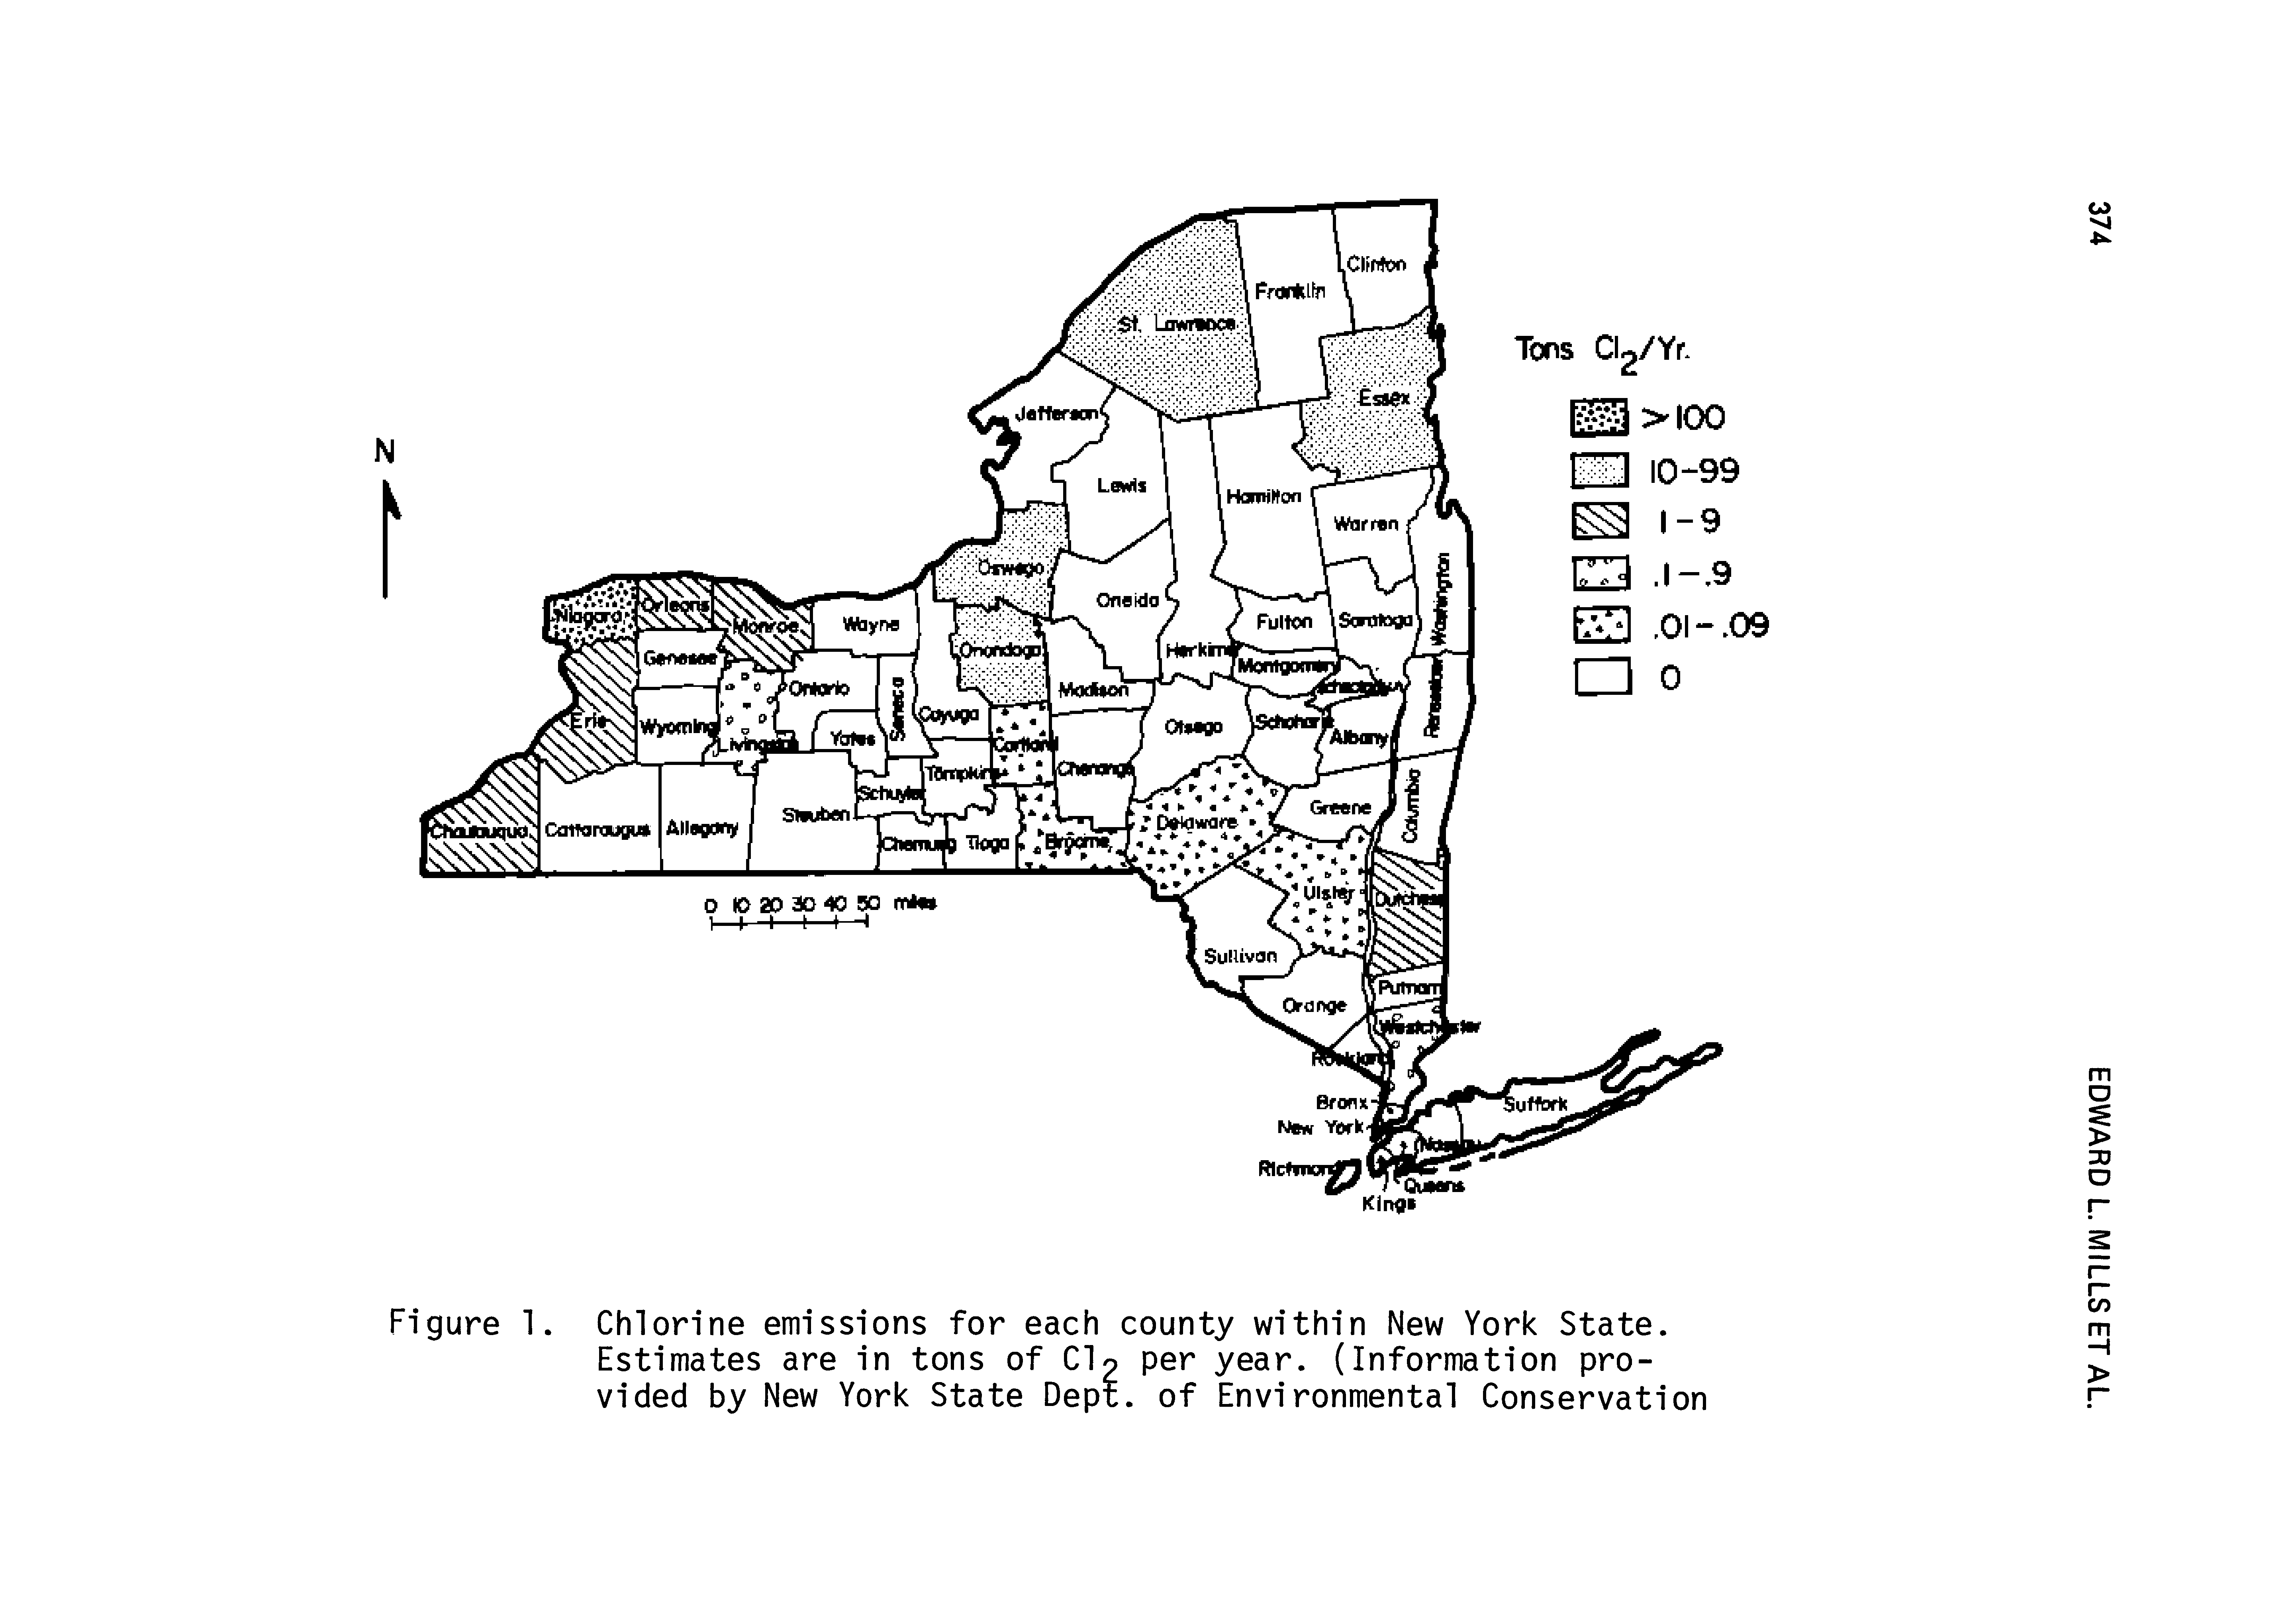 Figure 1. Chlorine emissions for each county within New York State.